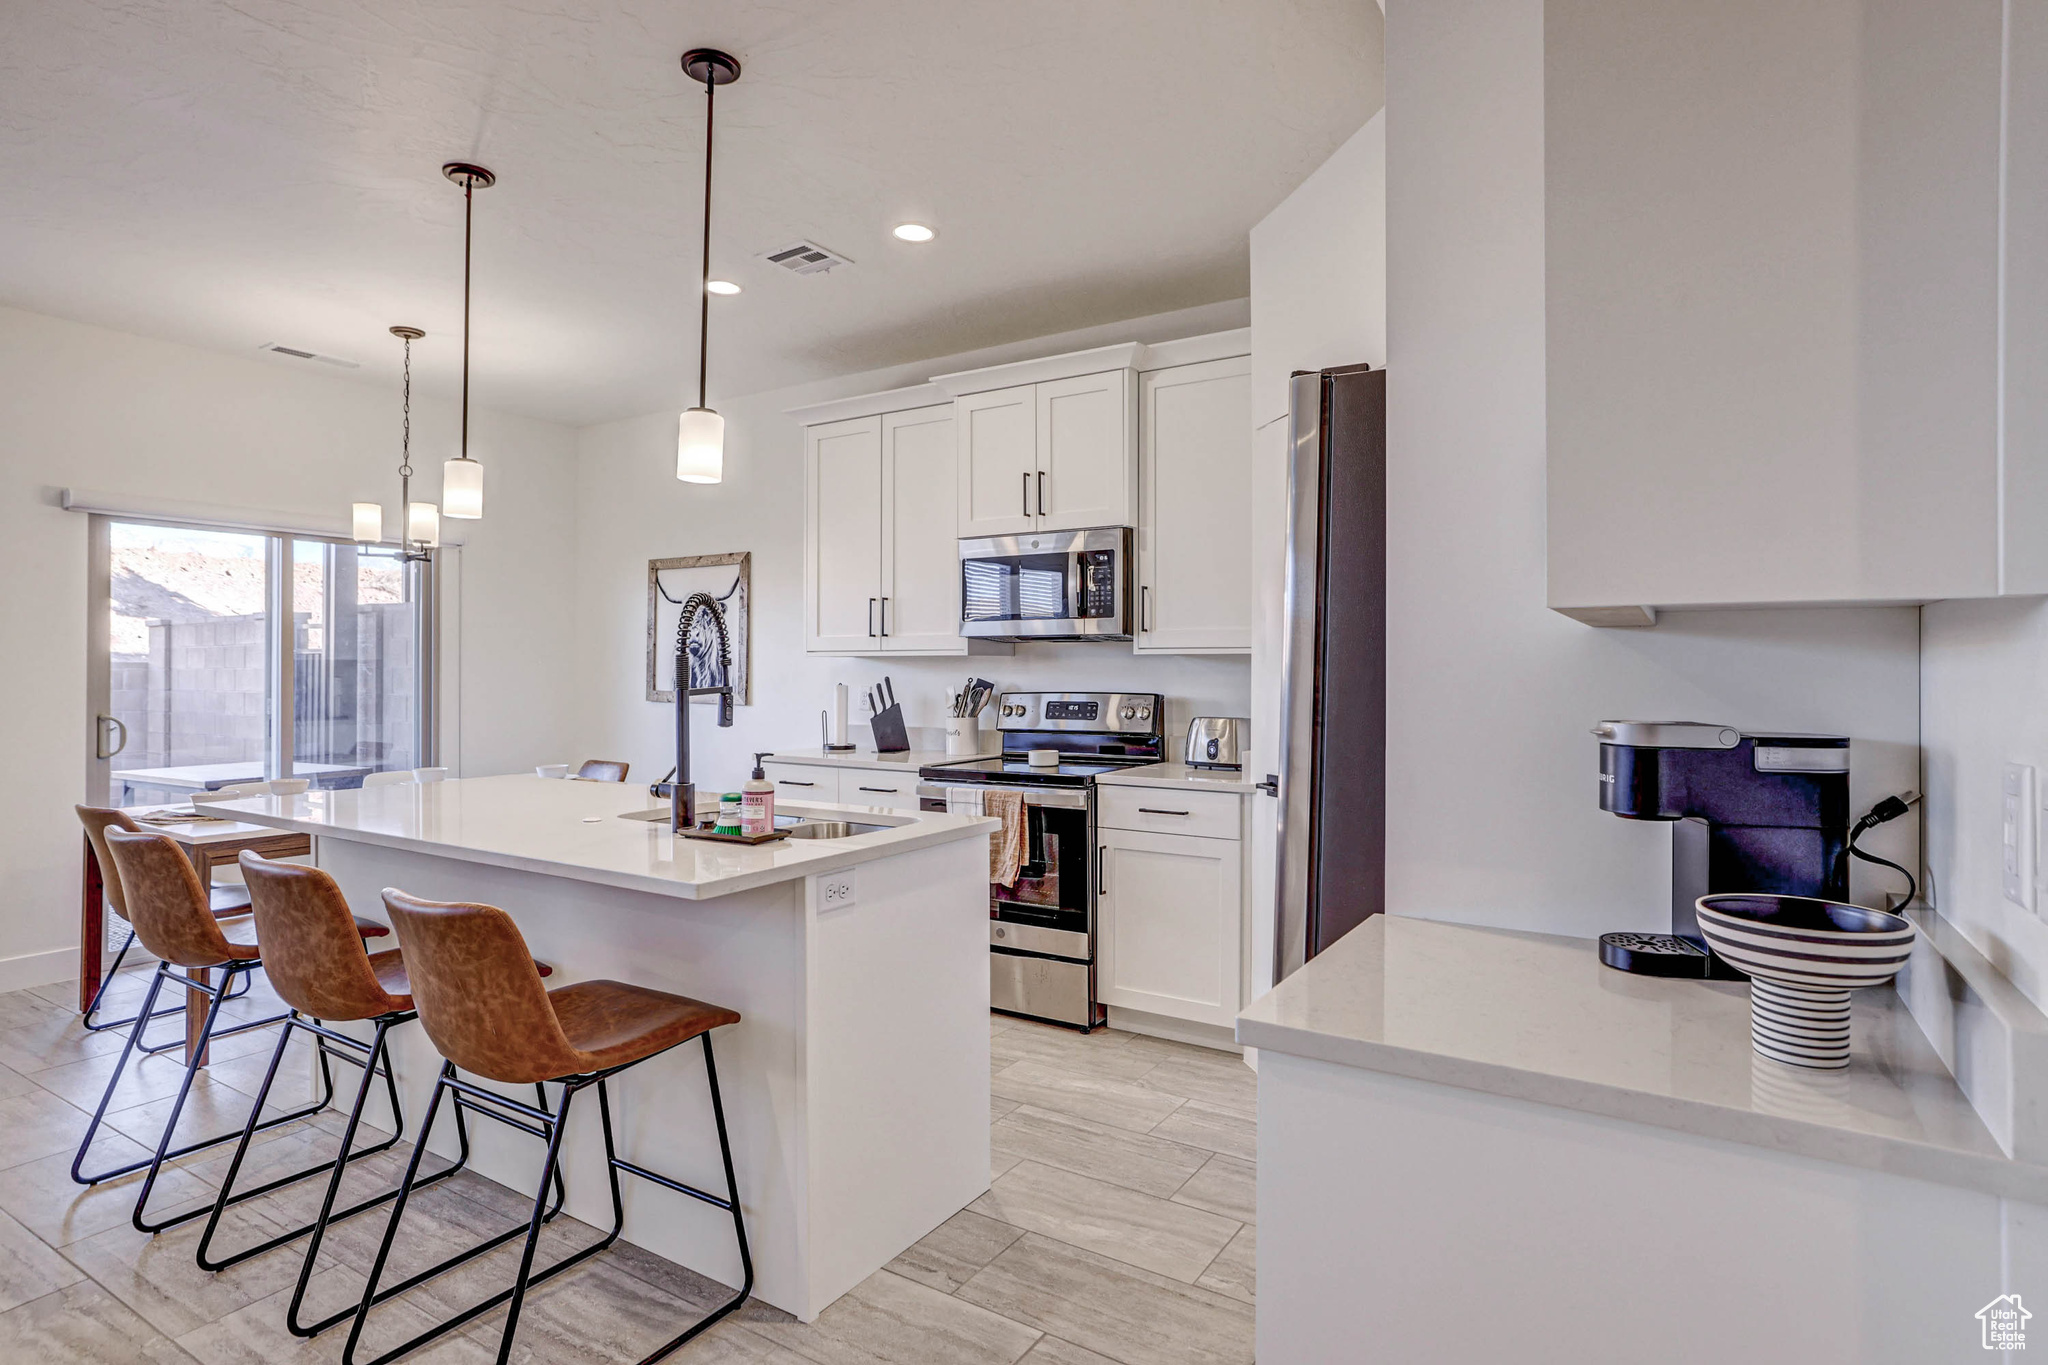 Kitchen featuring a breakfast bar, white cabinets, pendant lighting, stainless steel appliances, and an island with sink